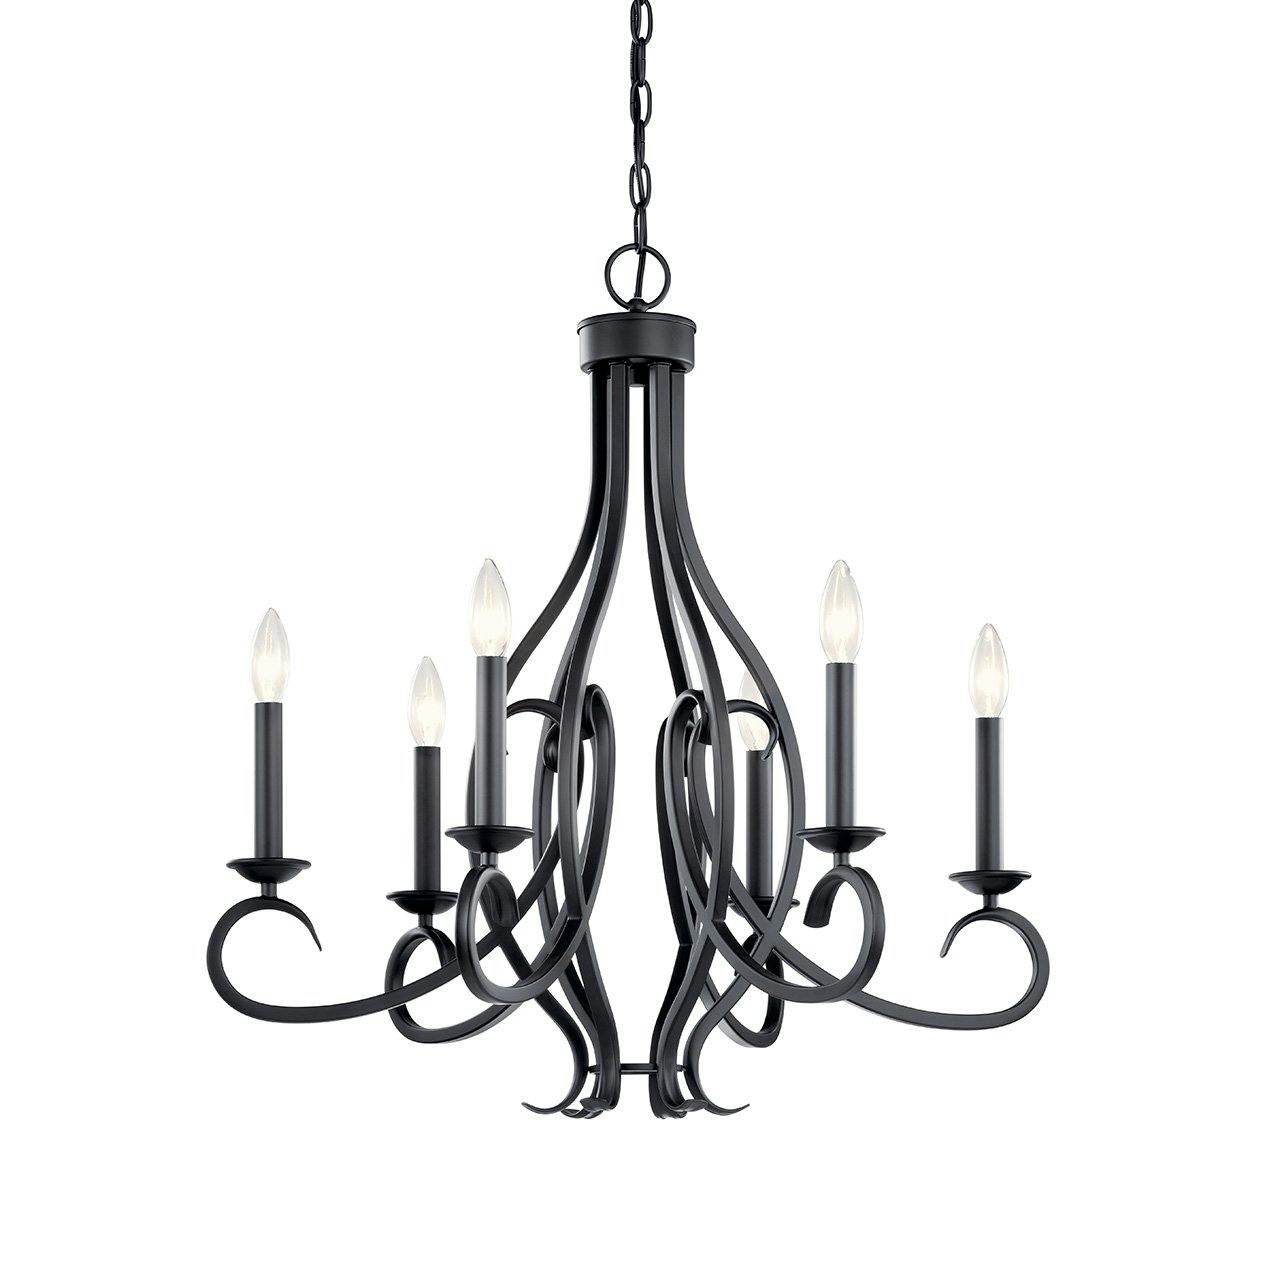 Ania 6 Light Chandelier in Black without the canopy on a white background